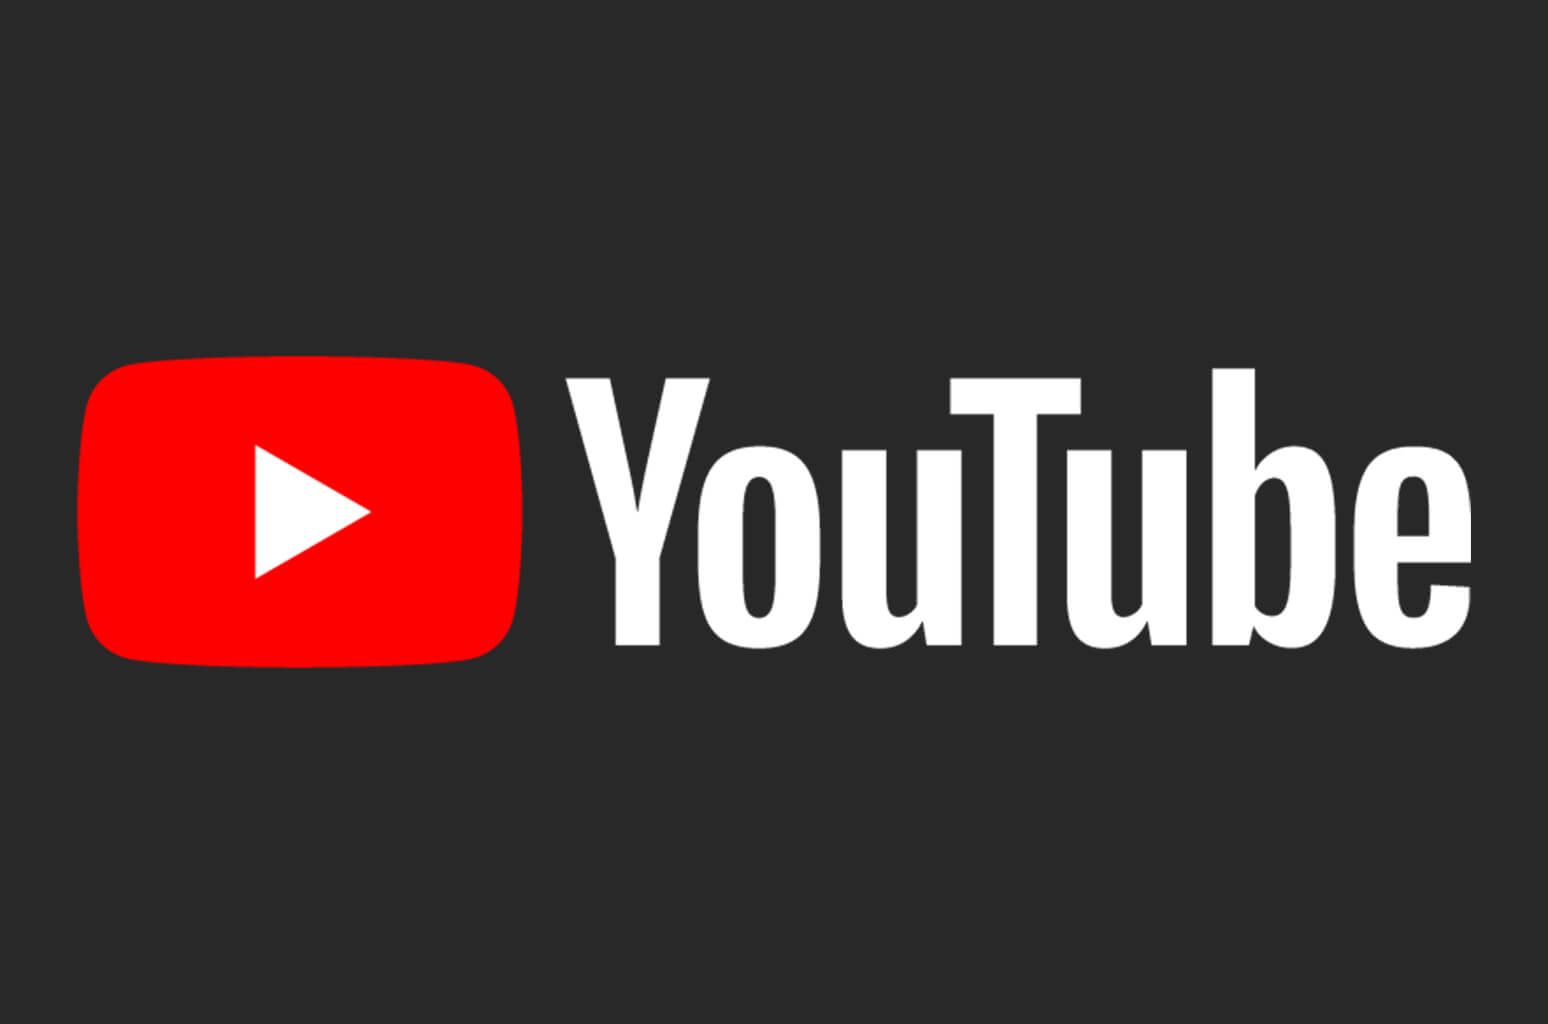 YouTube's new feature to warn users before they post toxic comments